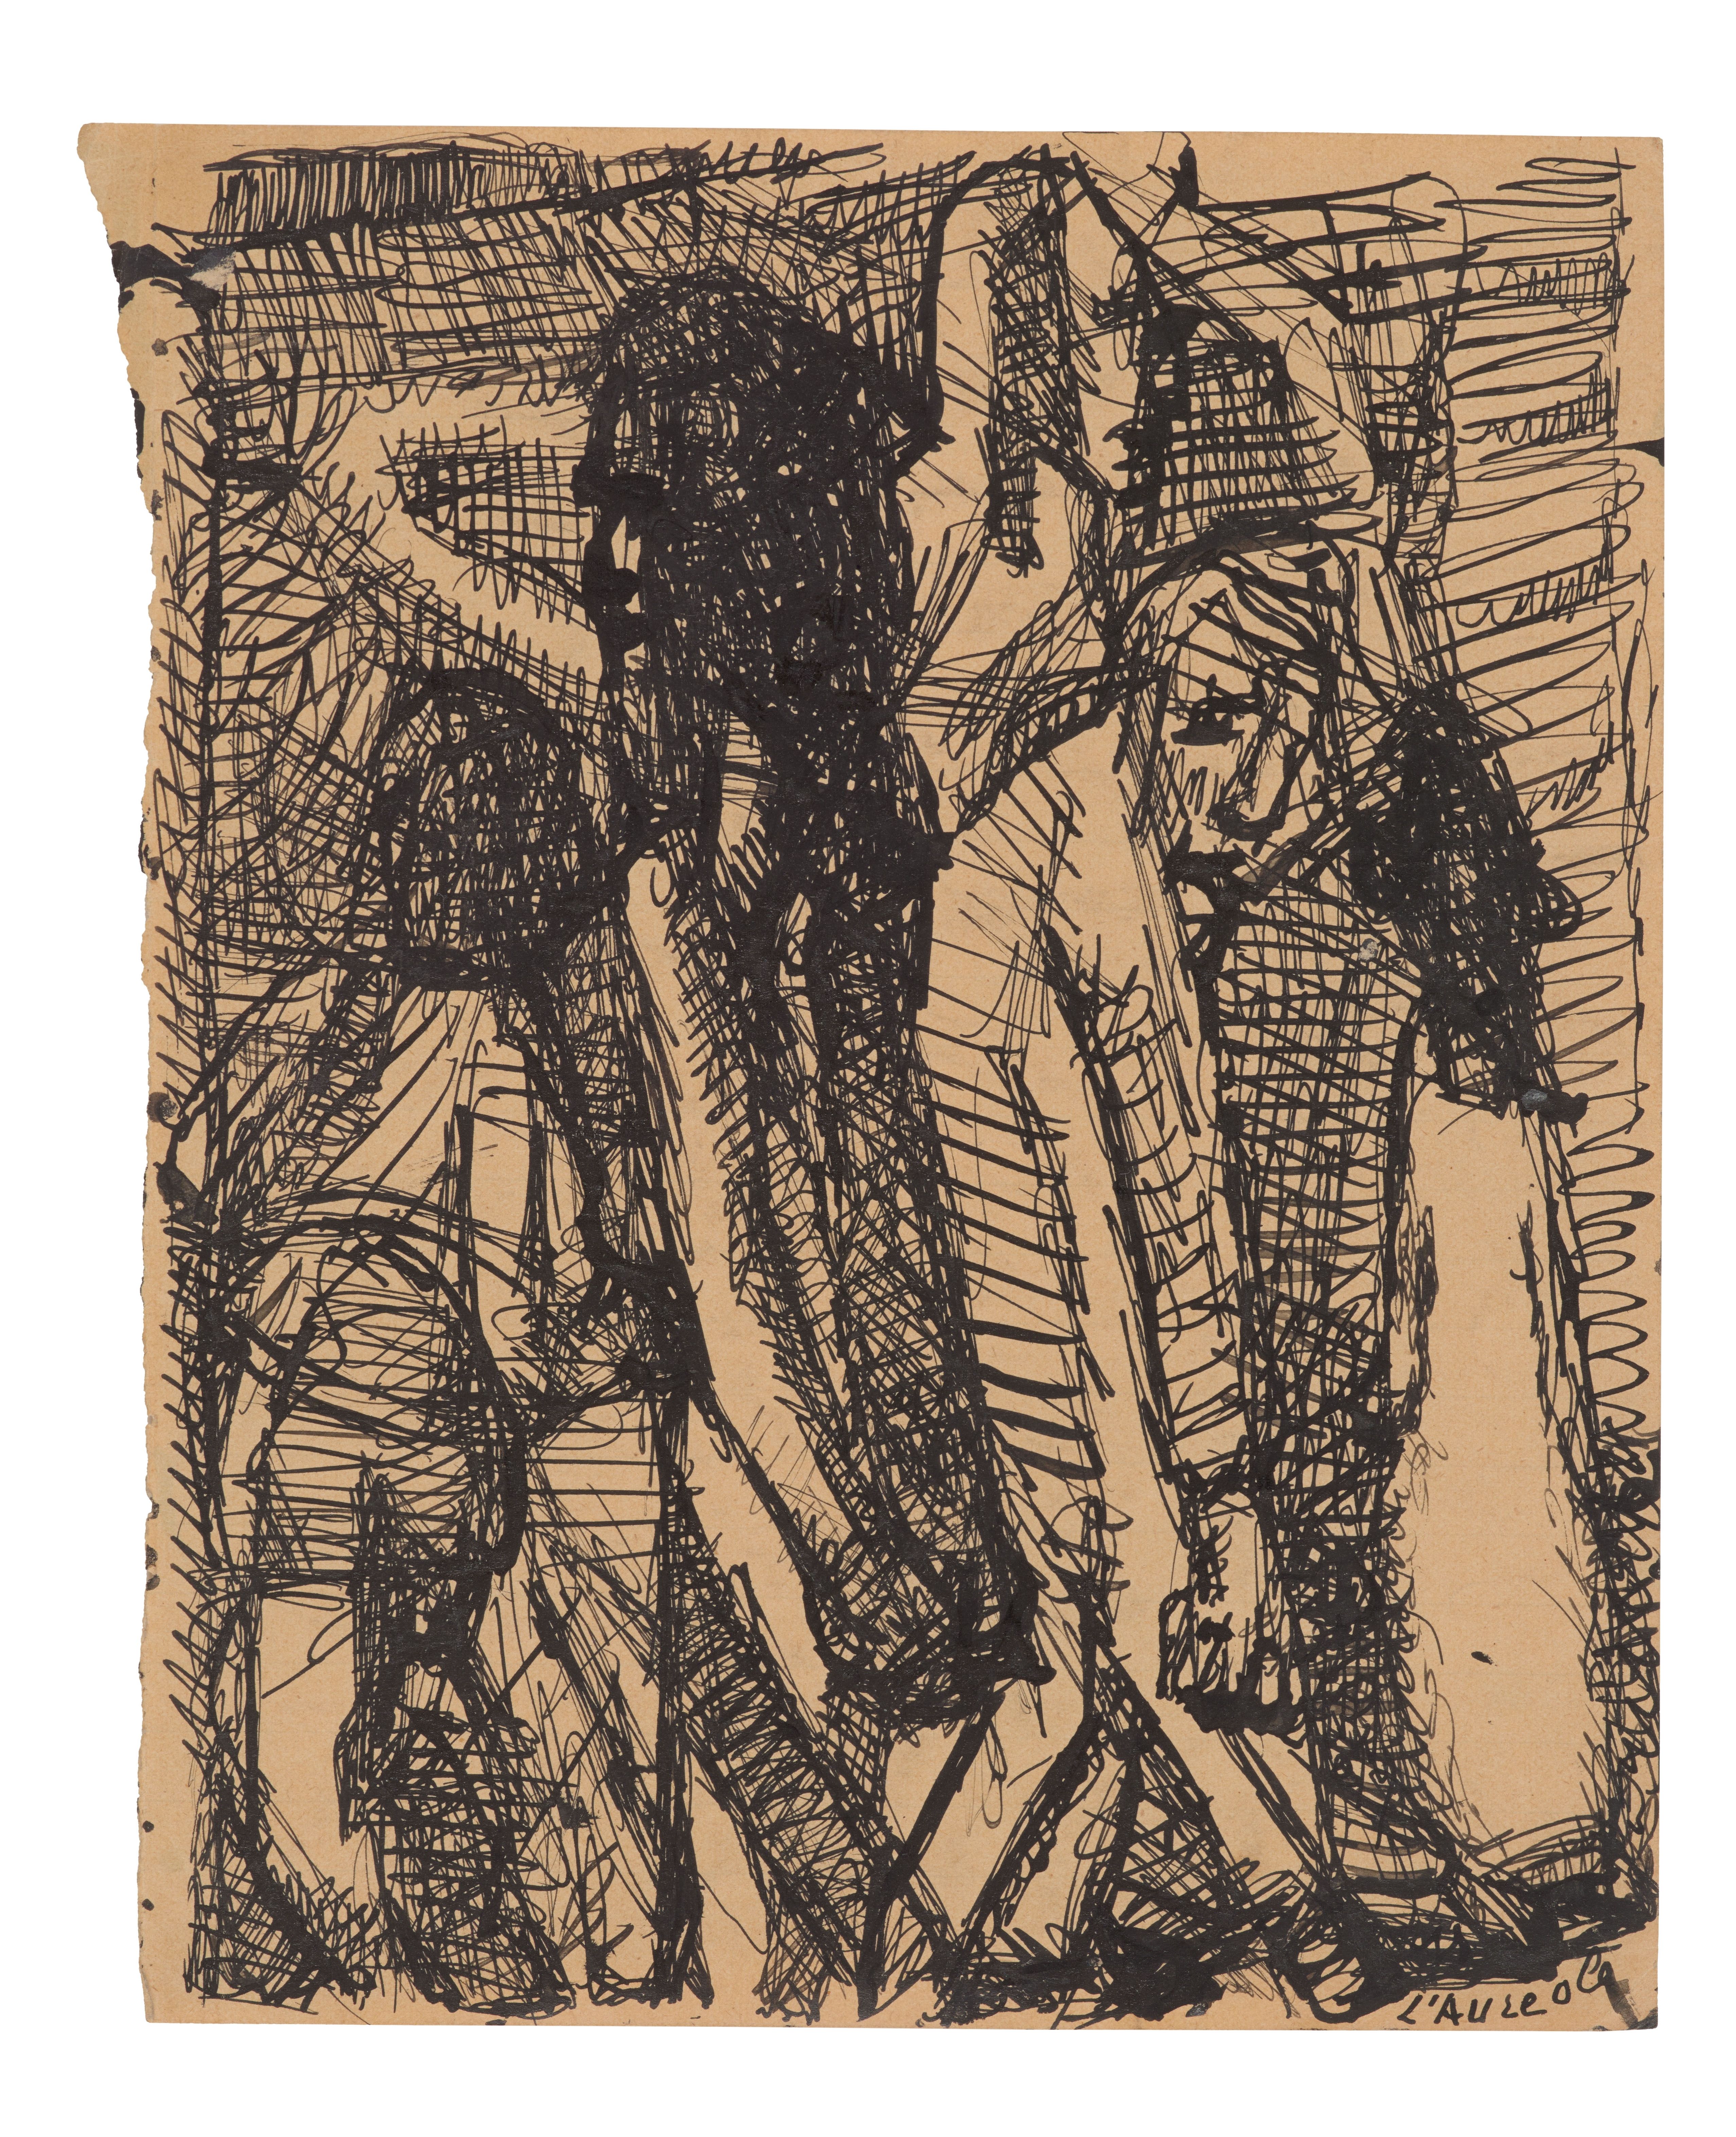 Artwork by Louis Soutter, L'Auréole, Made of Pen and ink drawing on brown paper